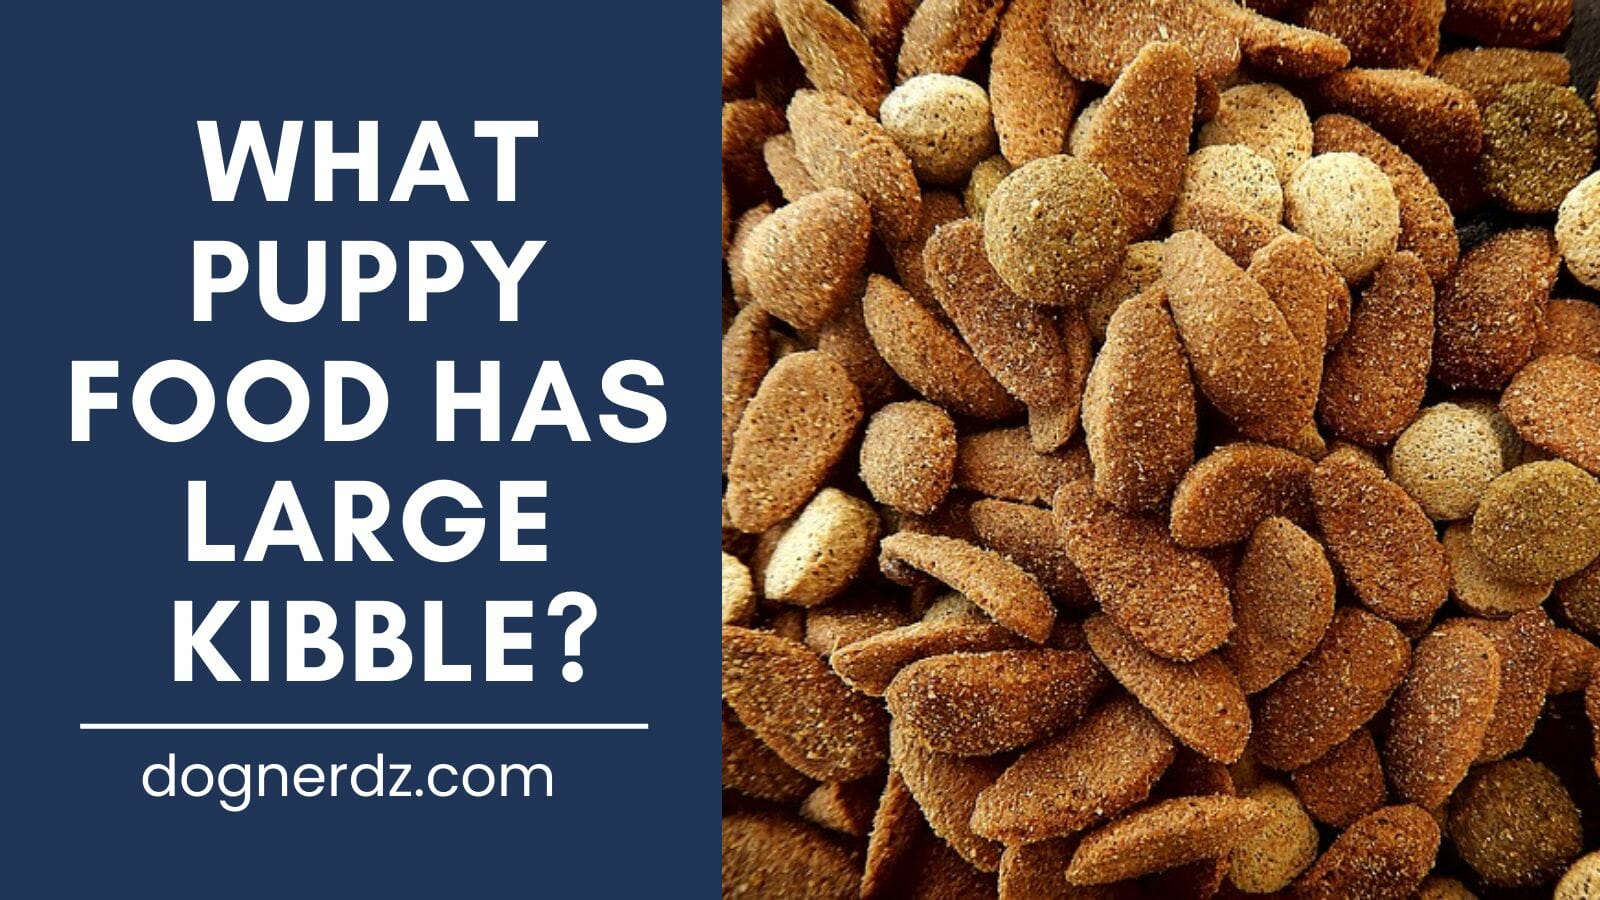 what puppy food has large kibble?